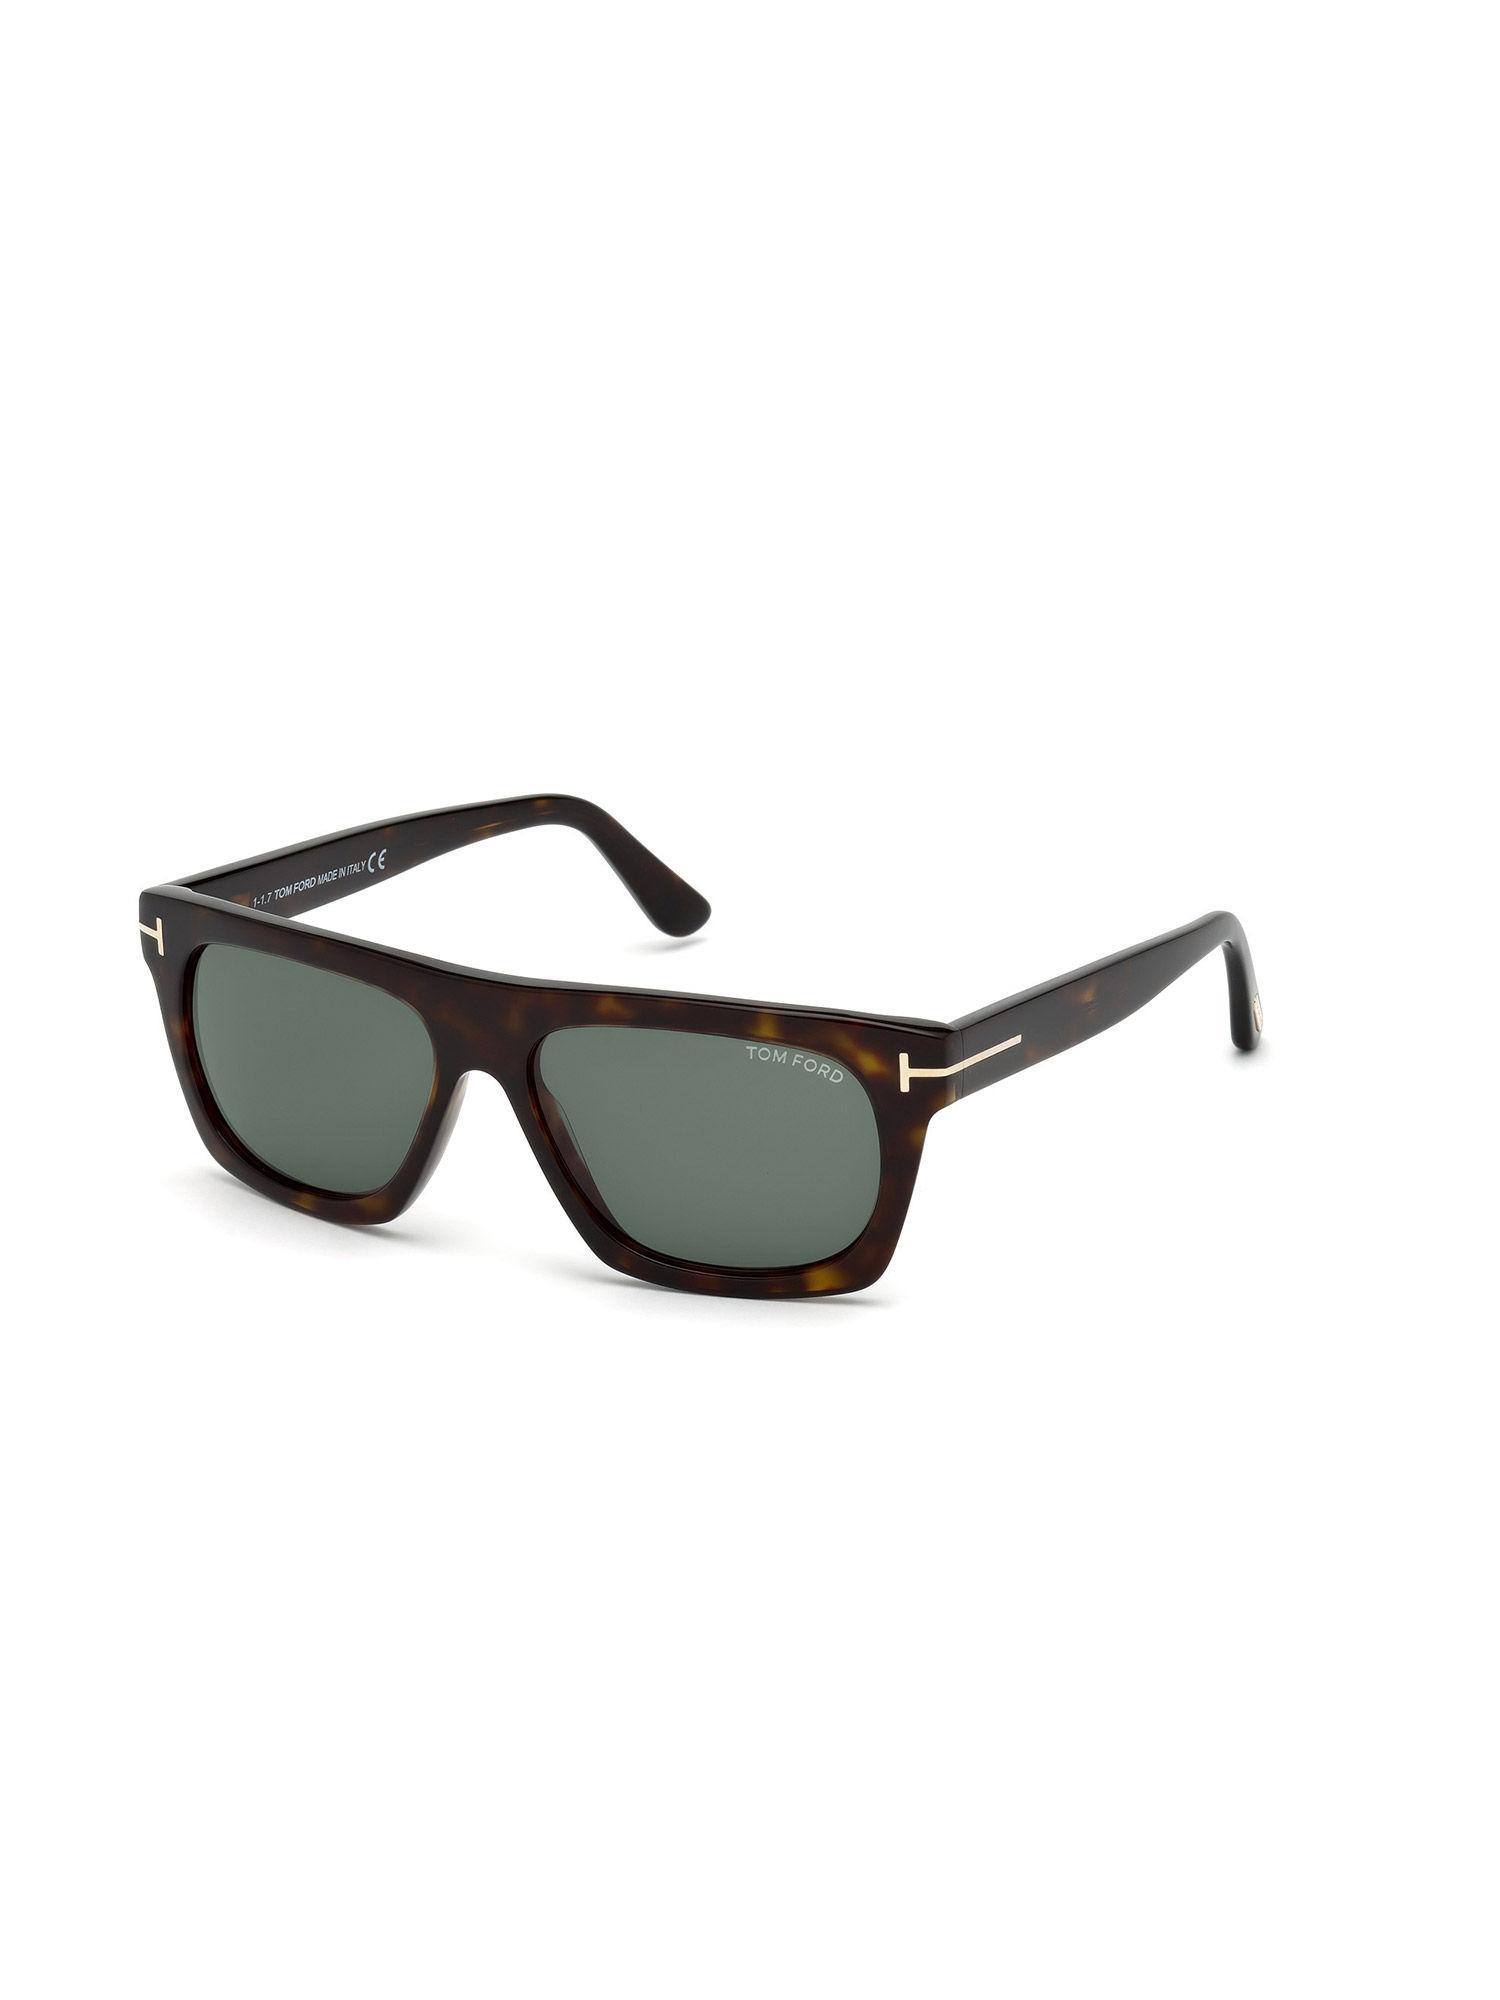 Ft0592 55 55N IS A Selection Of Iconic Aviator Shapes IN Premium Sunglasses